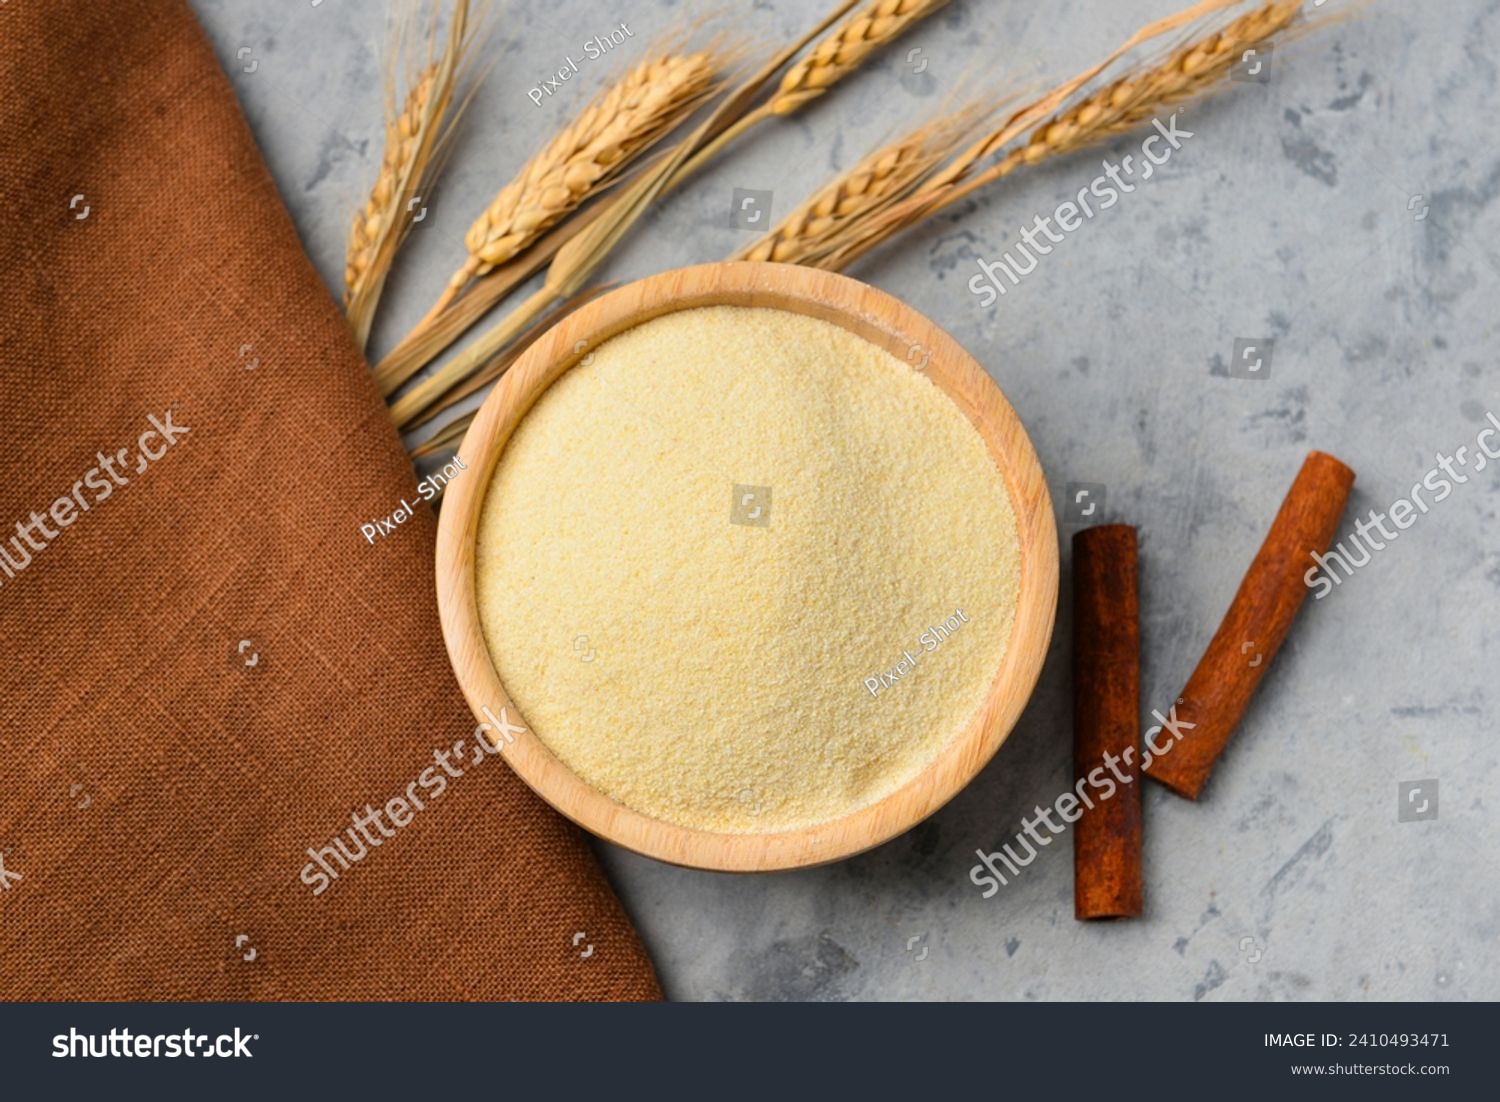 Bowl of raw semolina, cinnamon and spikelets on grunge background #2410493471